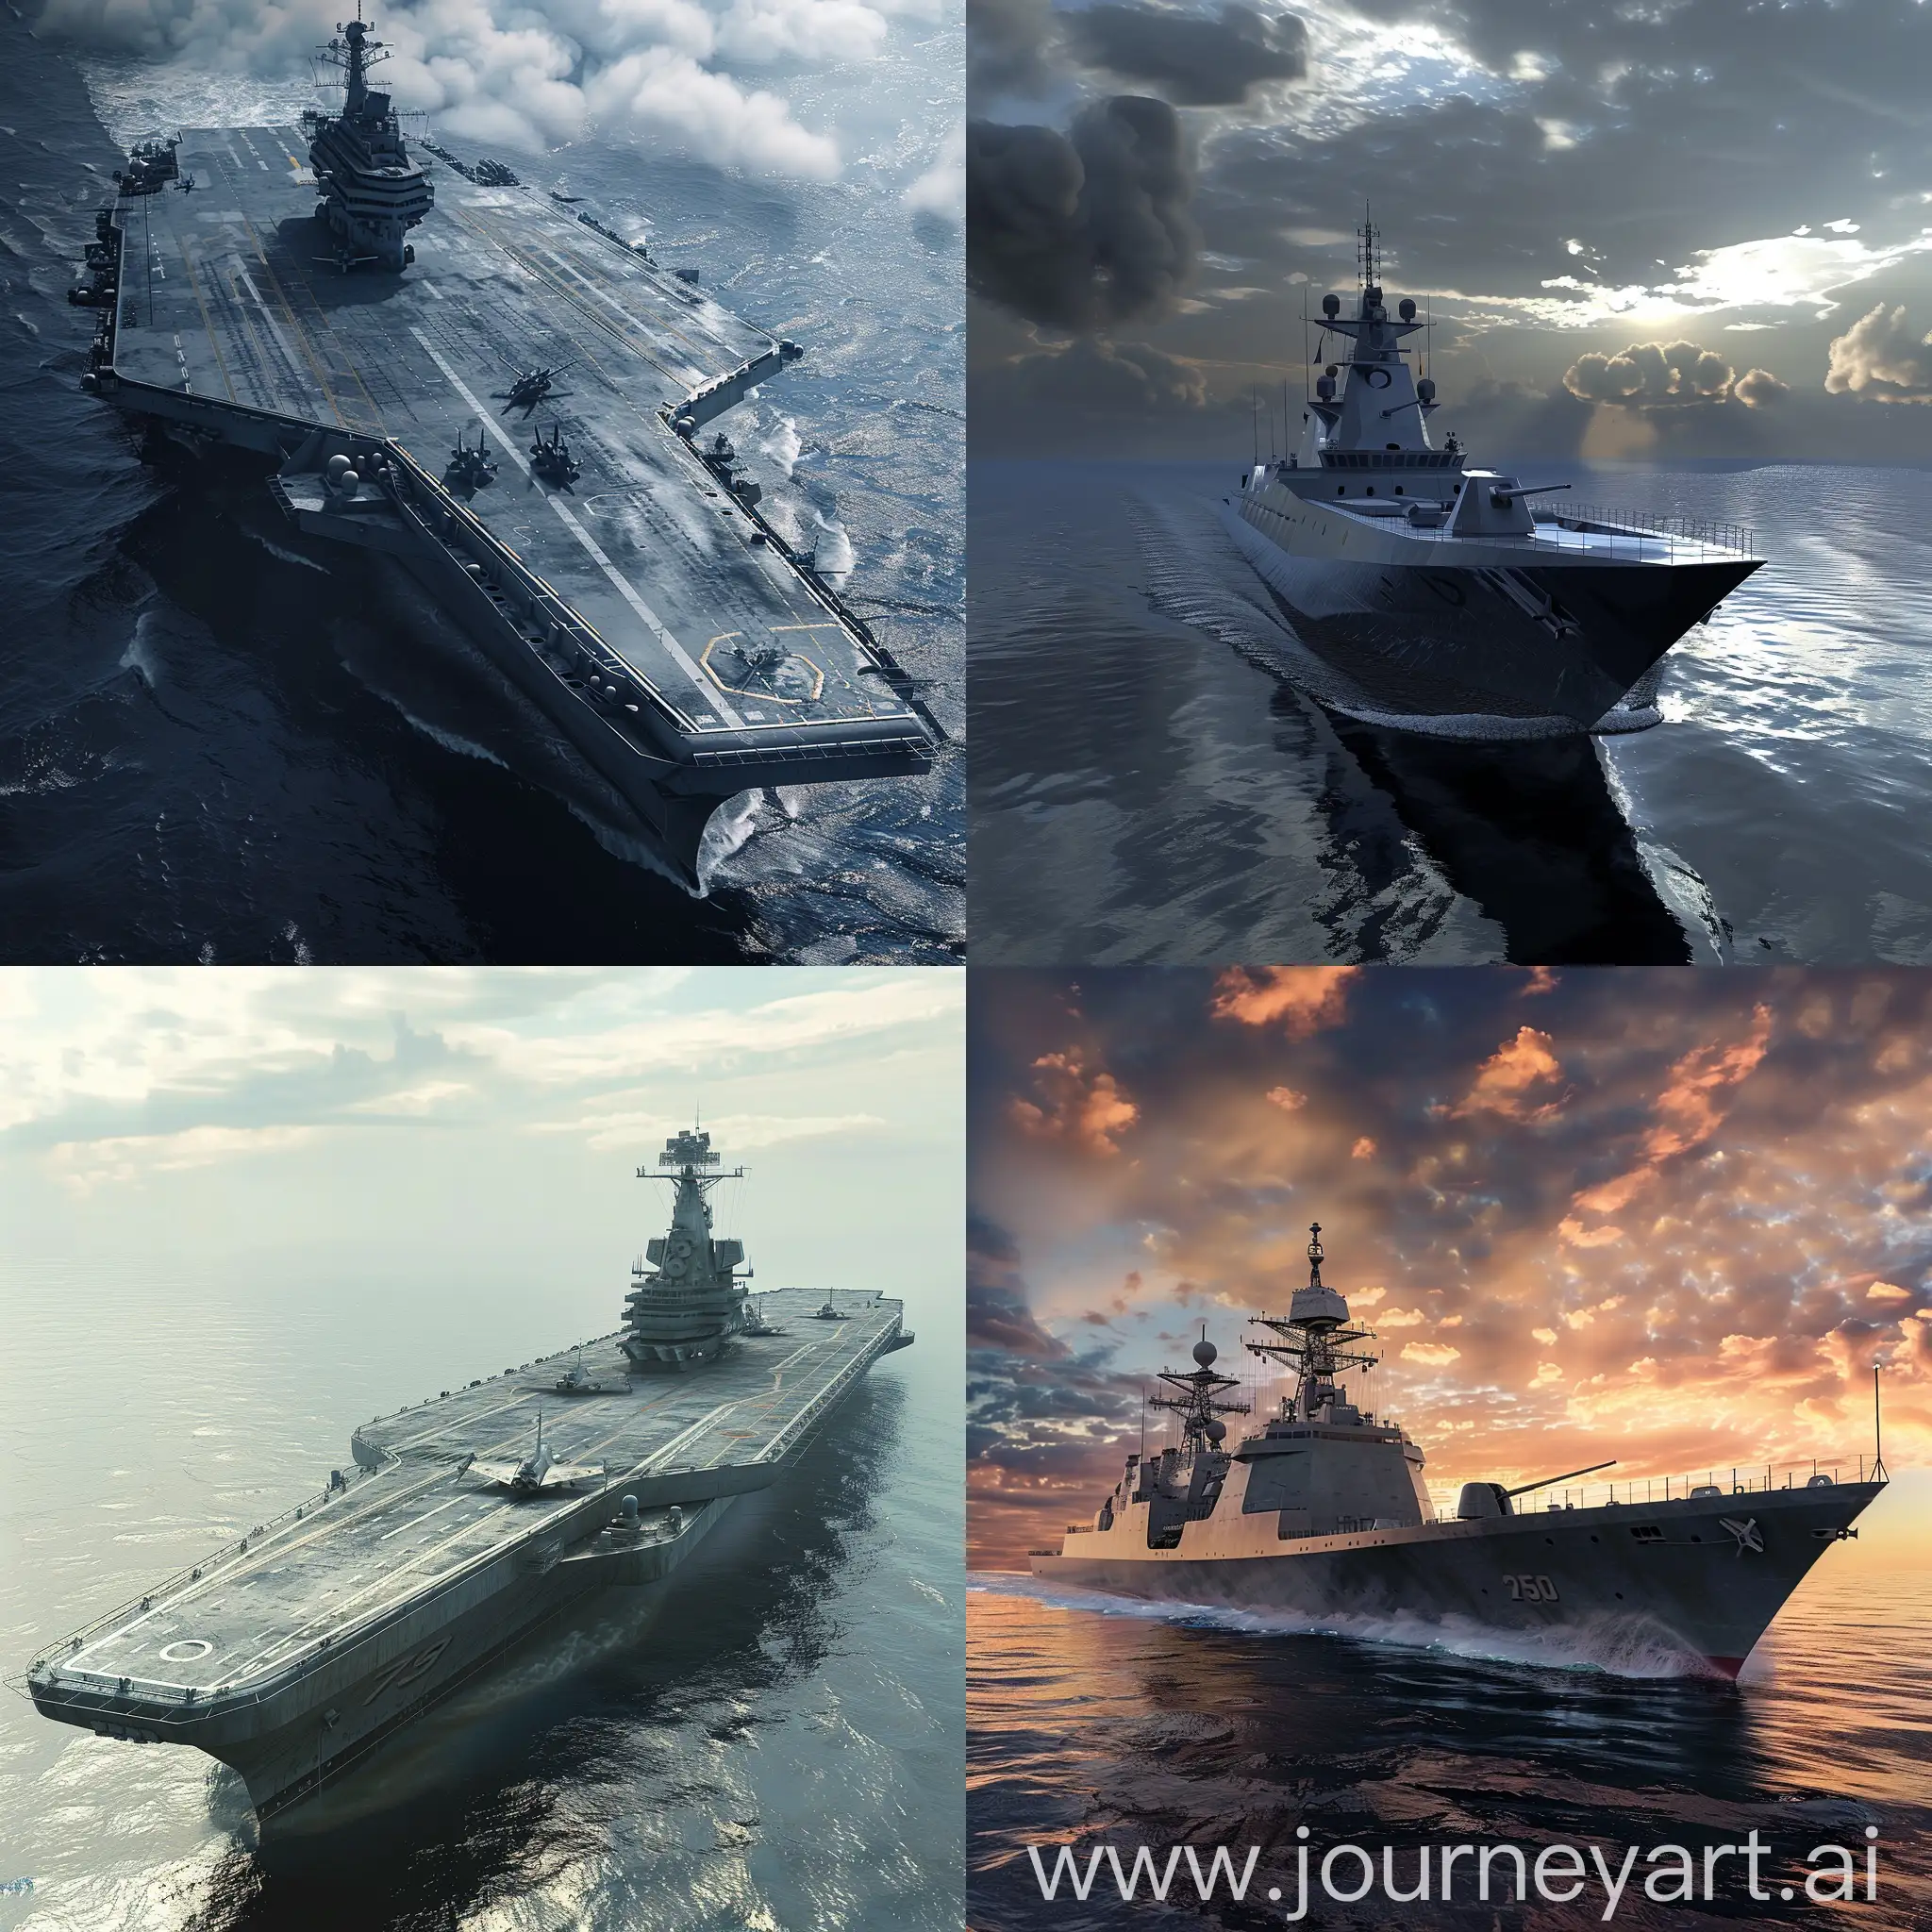 Futuristic-Modern-Combat-Warship-in-Detailed-Realistic-Photo